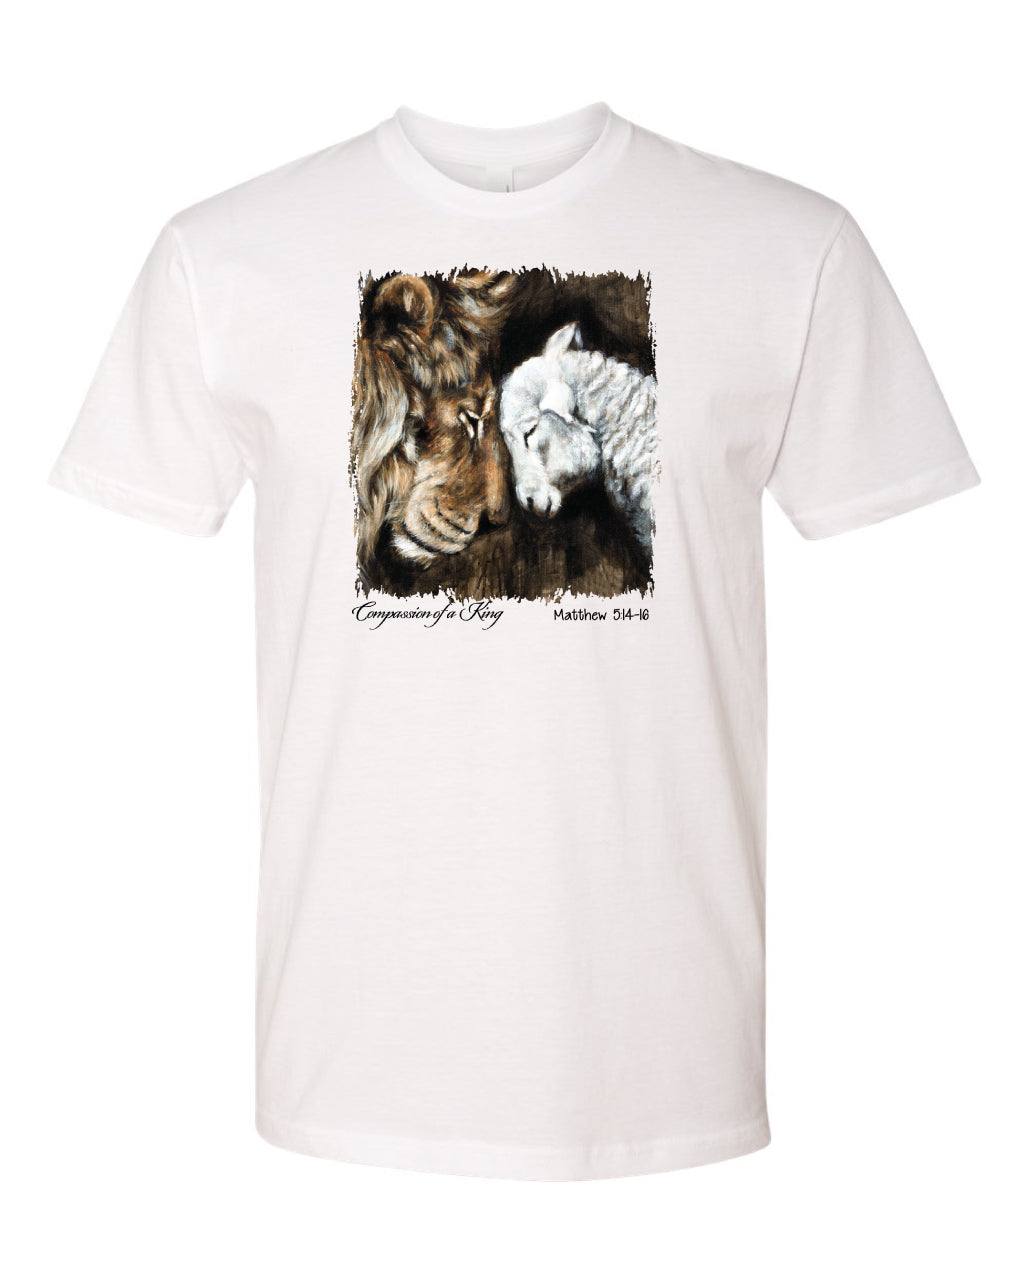 Compassion of a King, Unisex T-Shirt